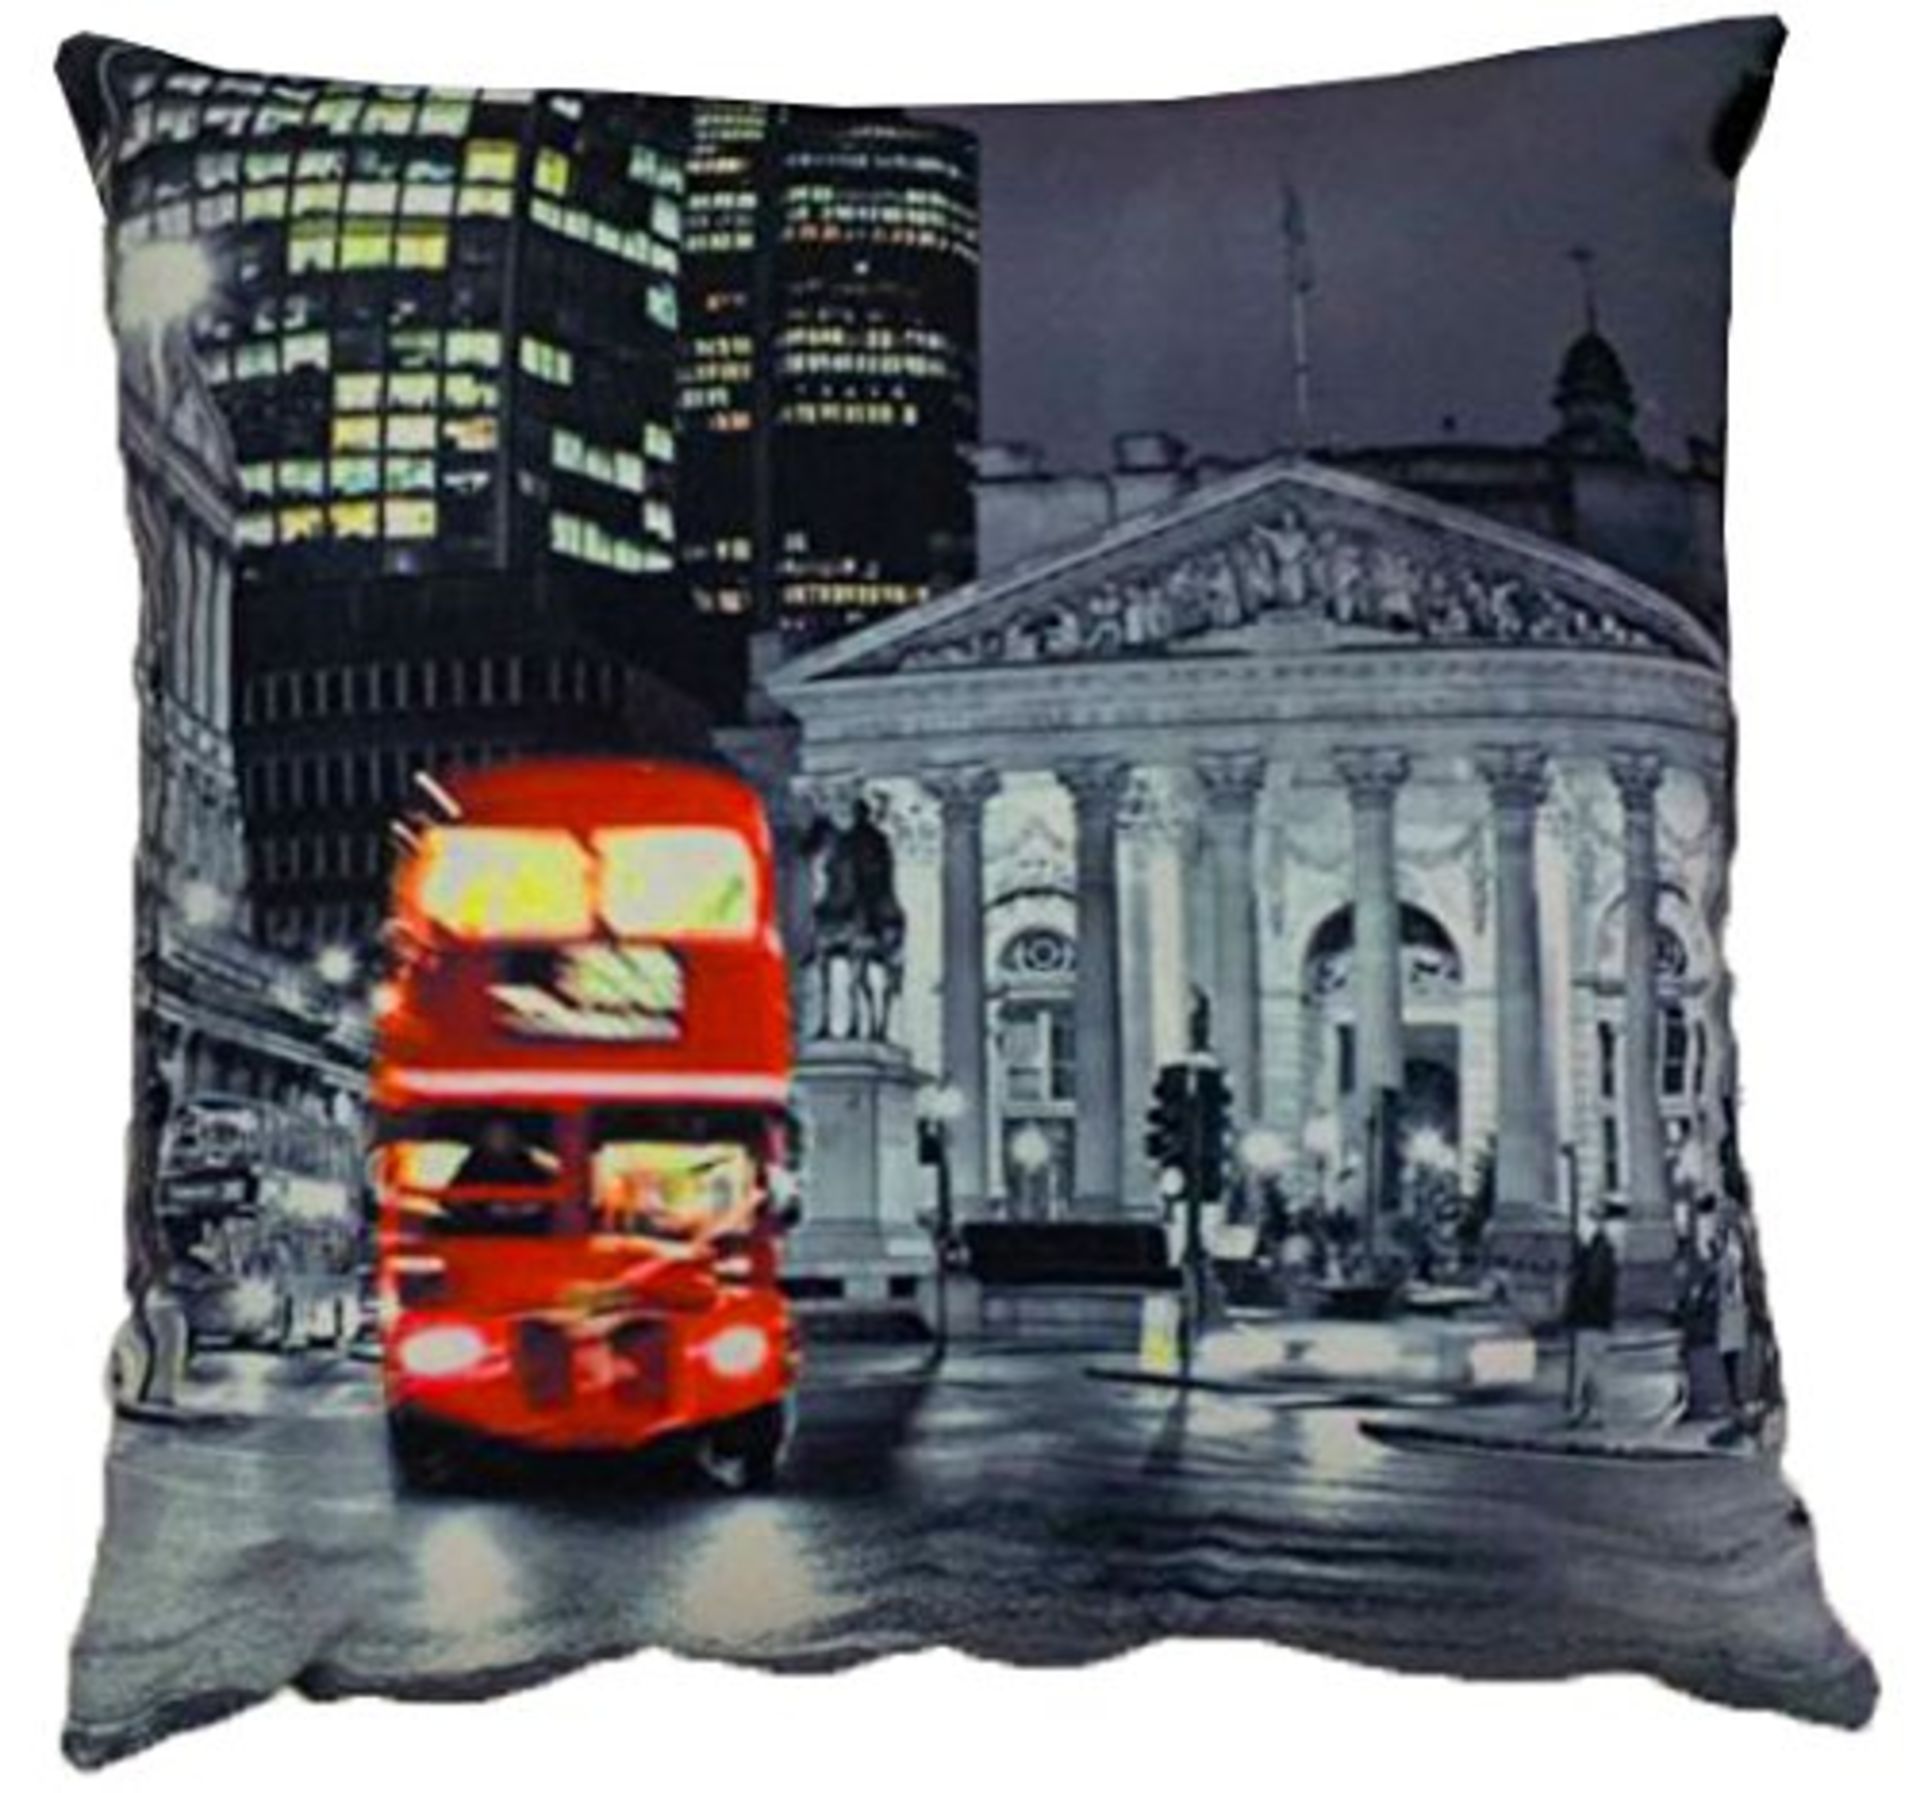 V Brand New Soft Faux Suede Cushion With Printed Picture Of London Routemaster Bus & Museum